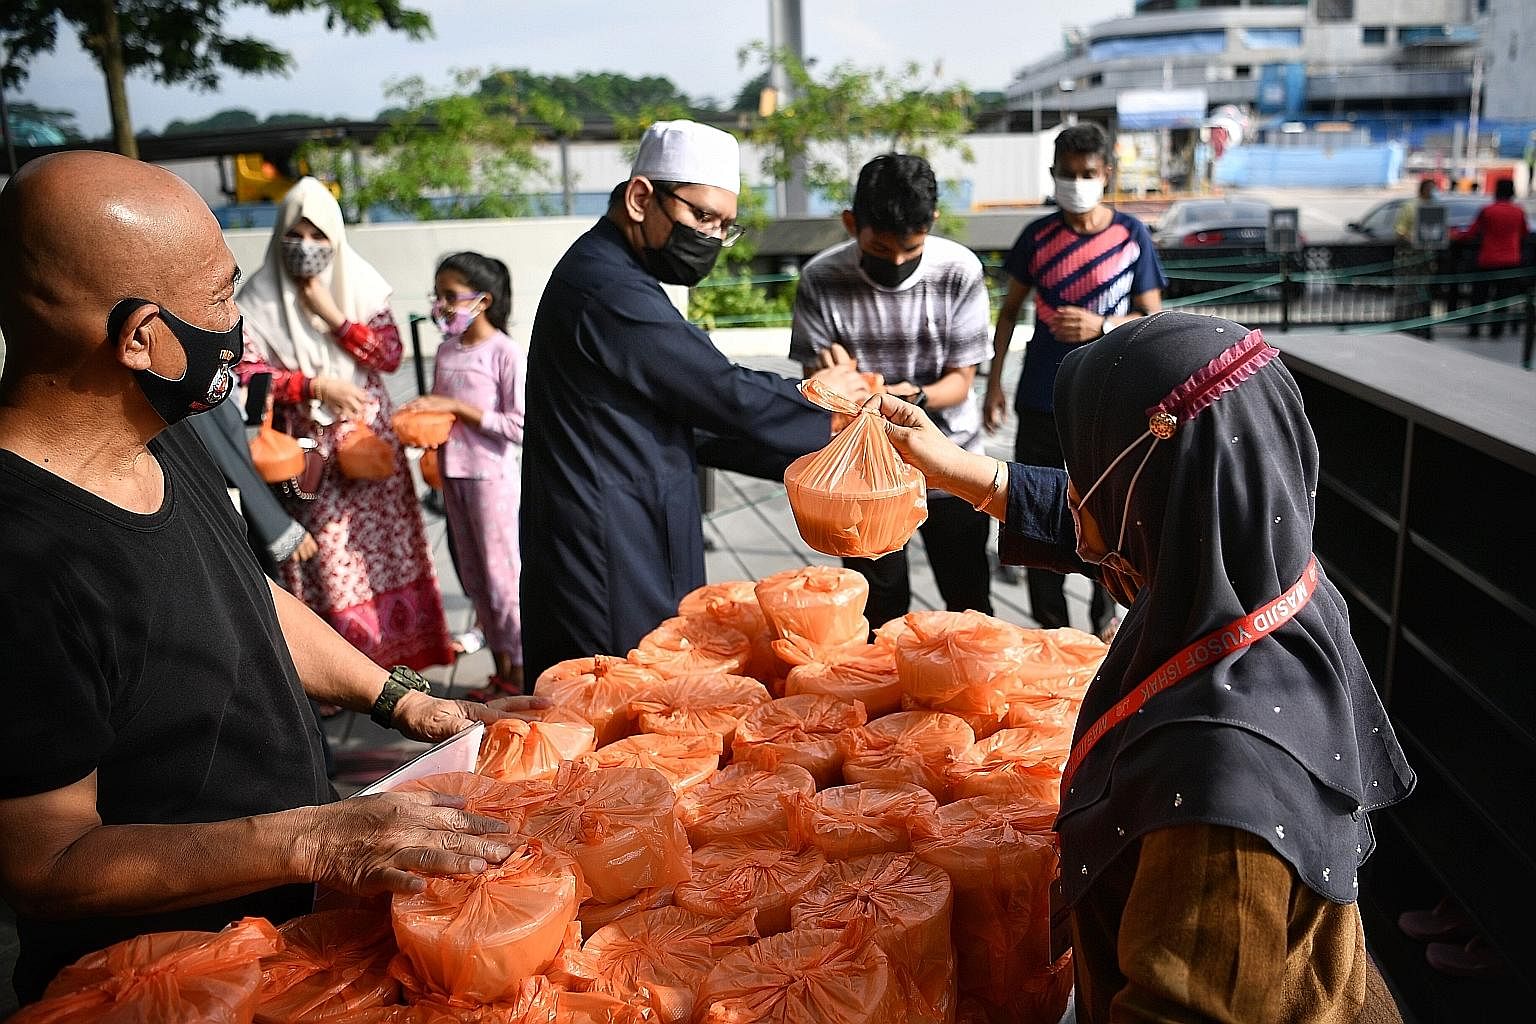 Staff and volunteers at Yusof Ishak Mosque in Woodlands distributing packets of porridge, a tradition during Ramadan - which began yesterday - to residents in the afternoon. A mosque spokesman said that 400 packets had been catered, of which 100 were